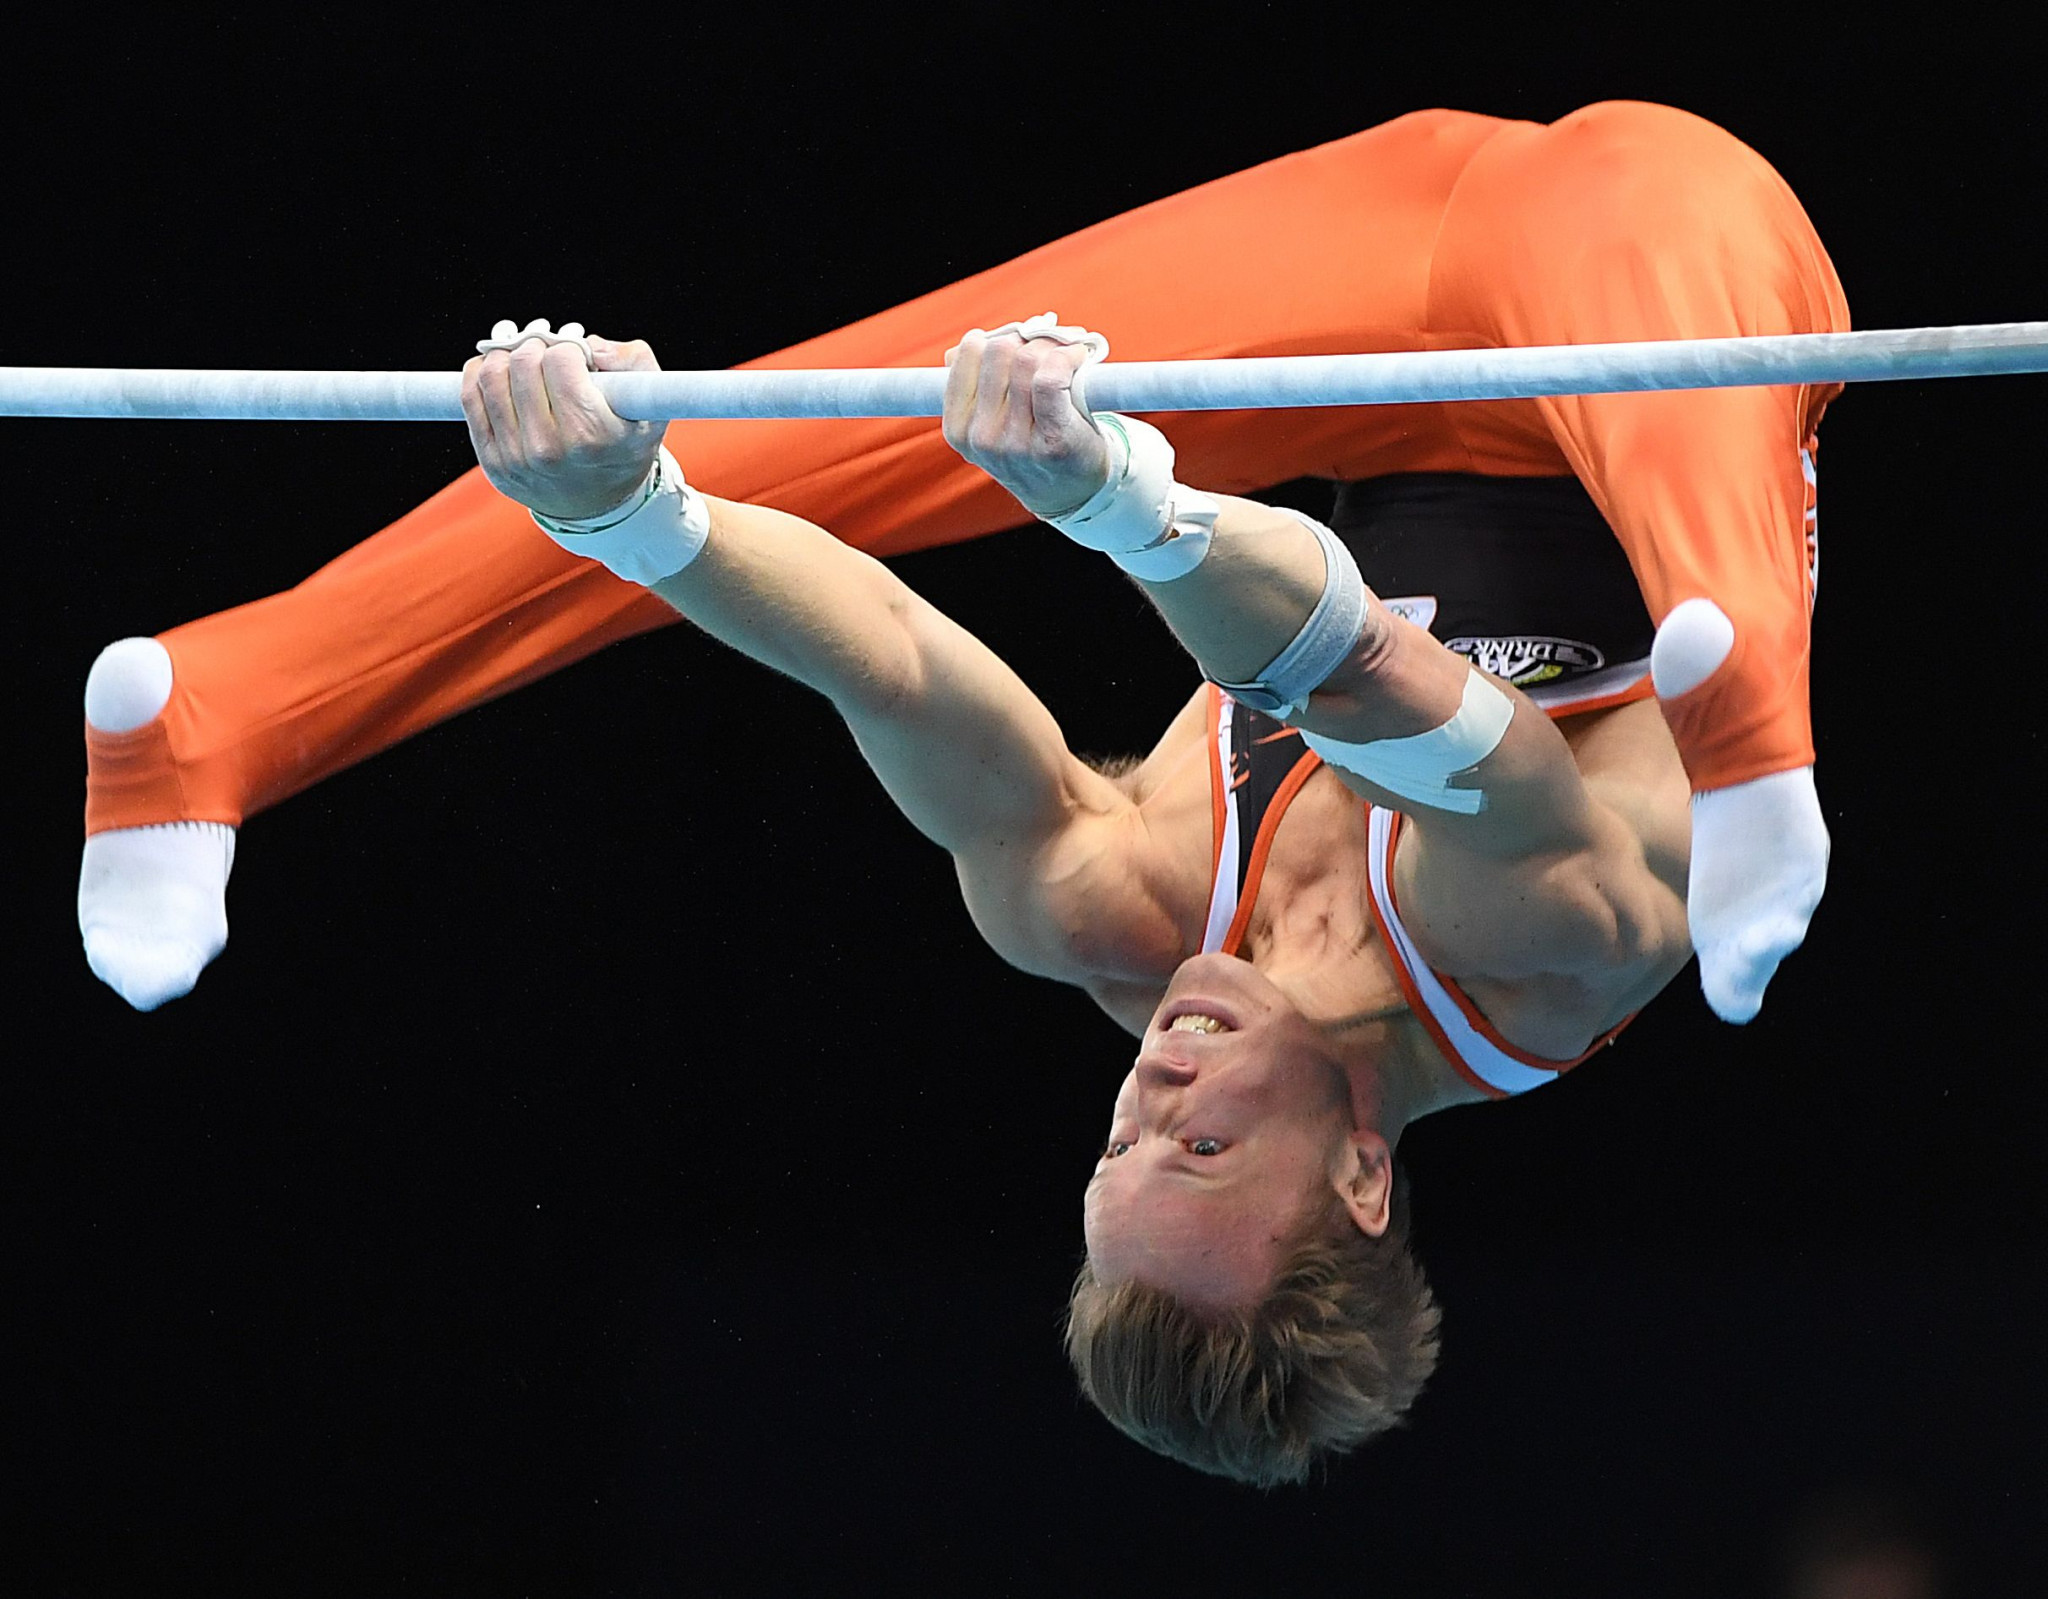 Olympic gold medallist Epke Zonderland finished first in men's high bar qualification ©Getty Images